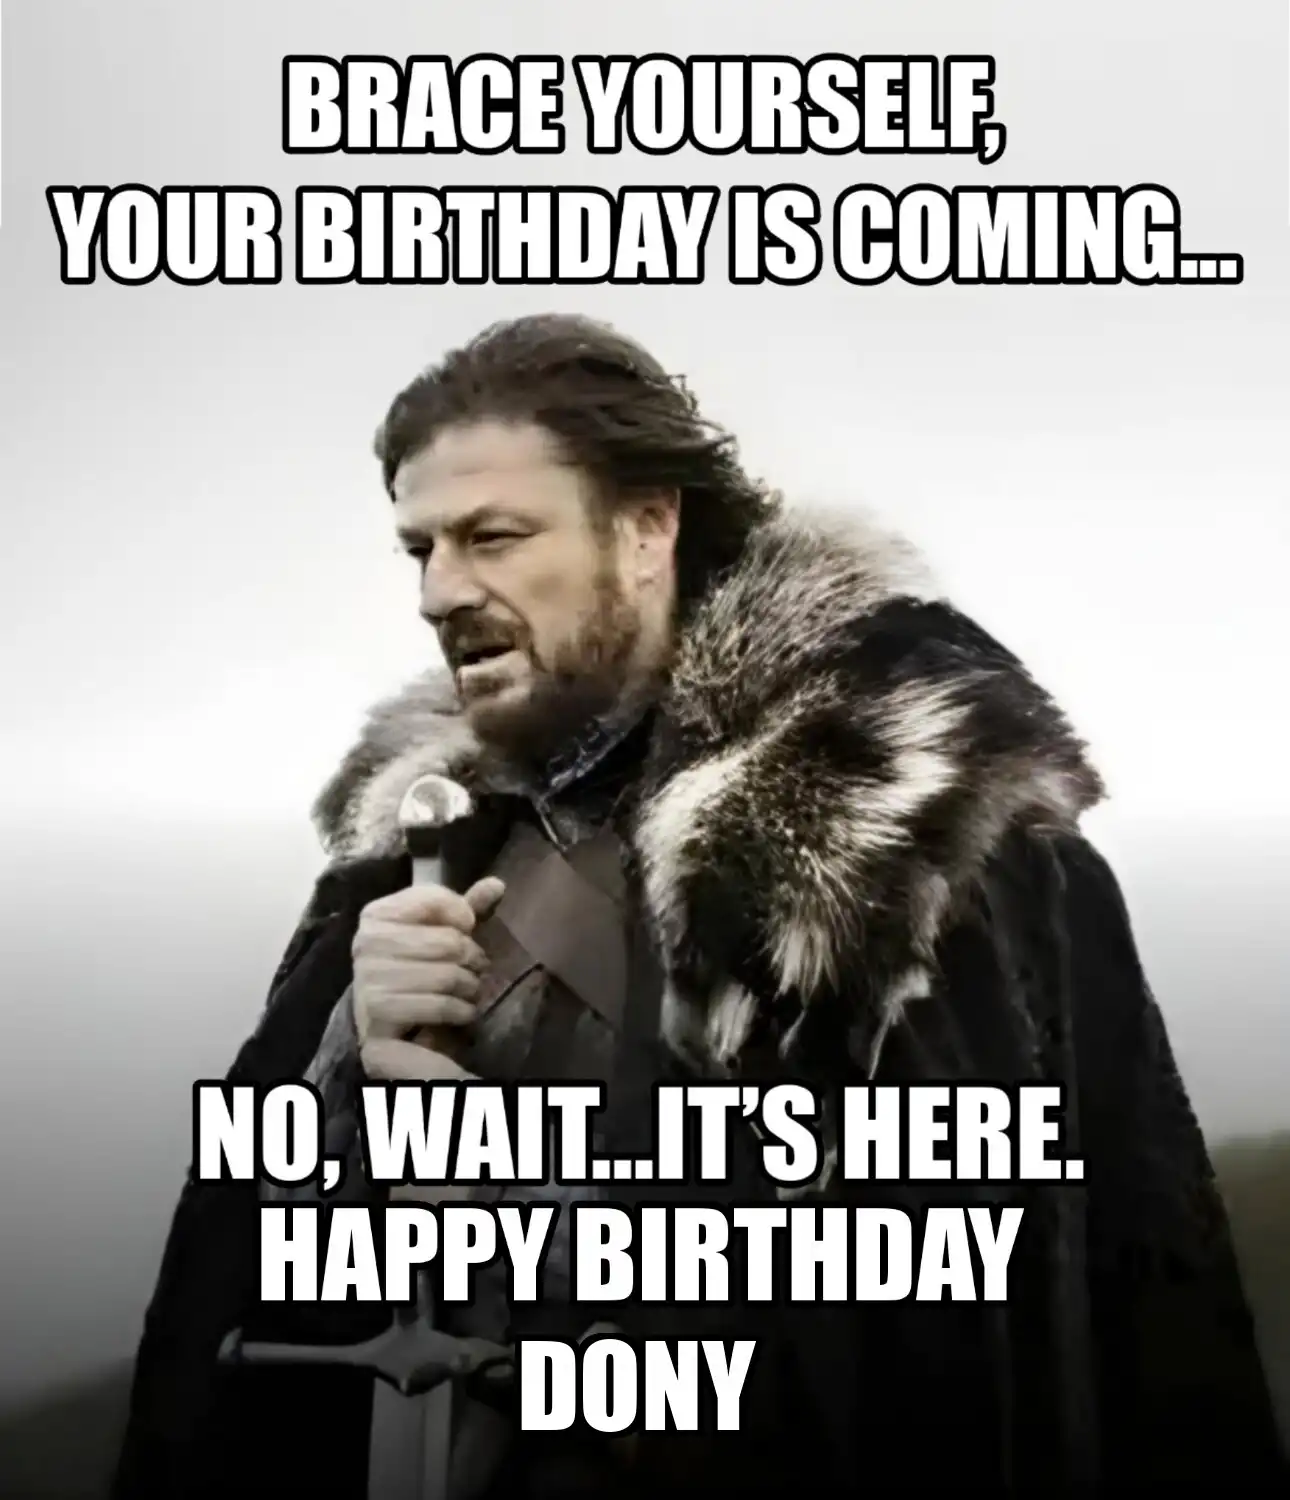 Happy Birthday Dony Brace Yourself Your Birthday Is Coming Meme